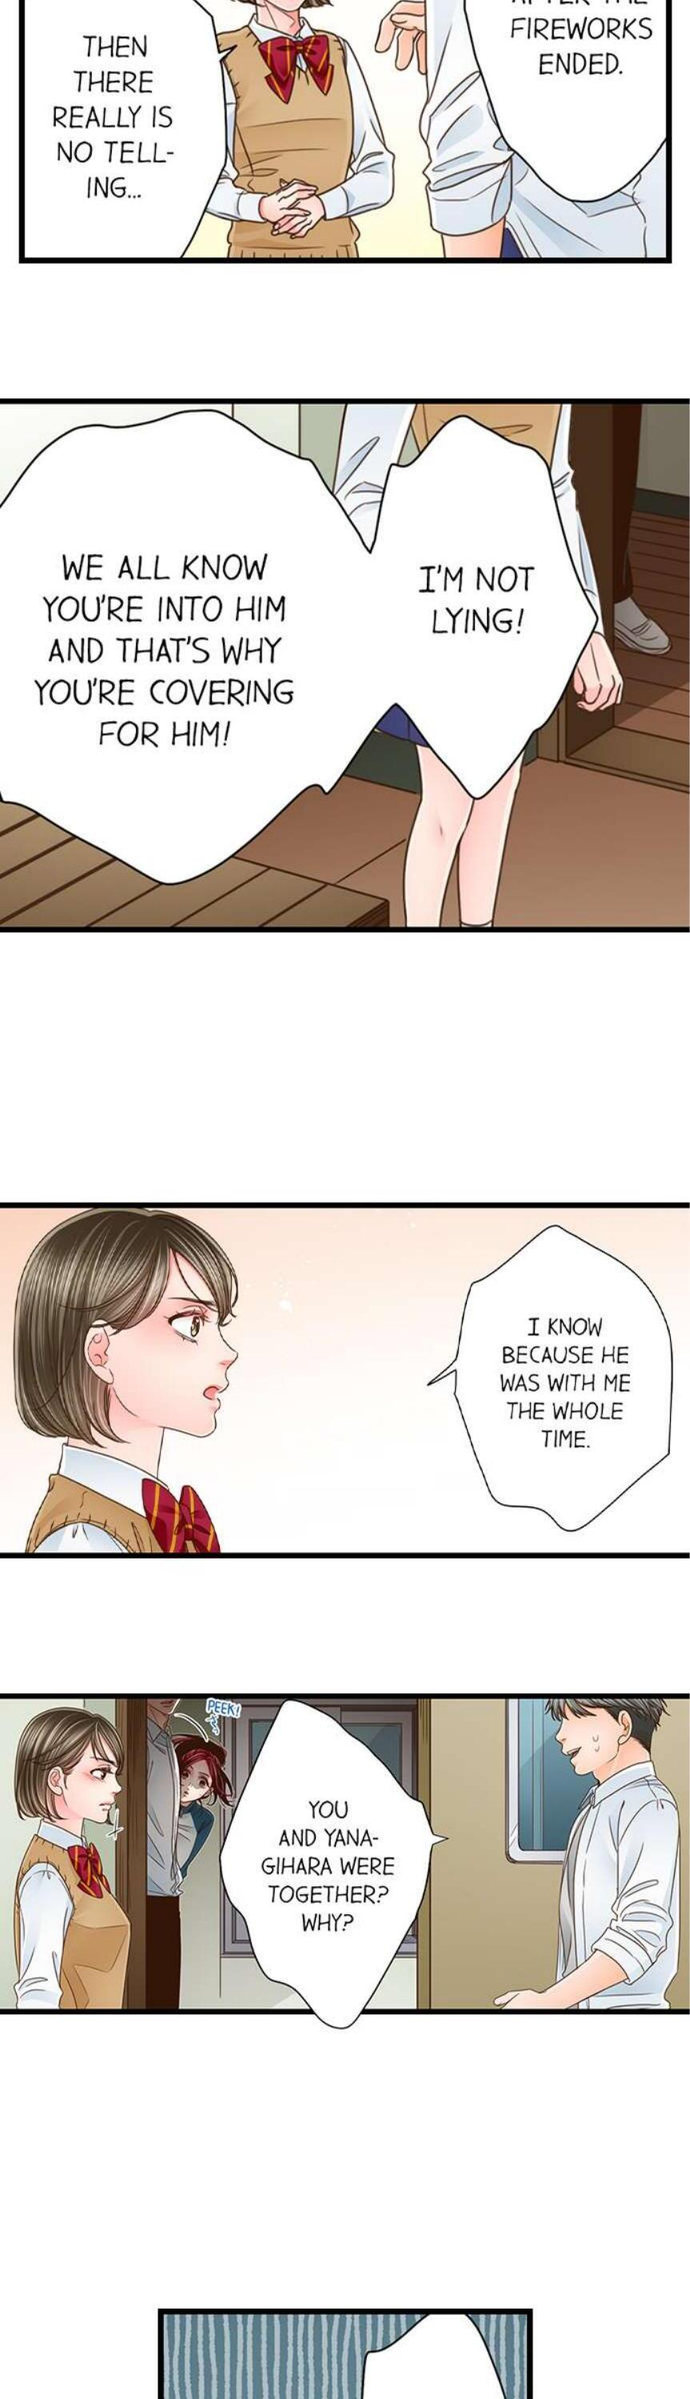 Yanagihara Is a Sex Addict. - Chapter 137 Page 2